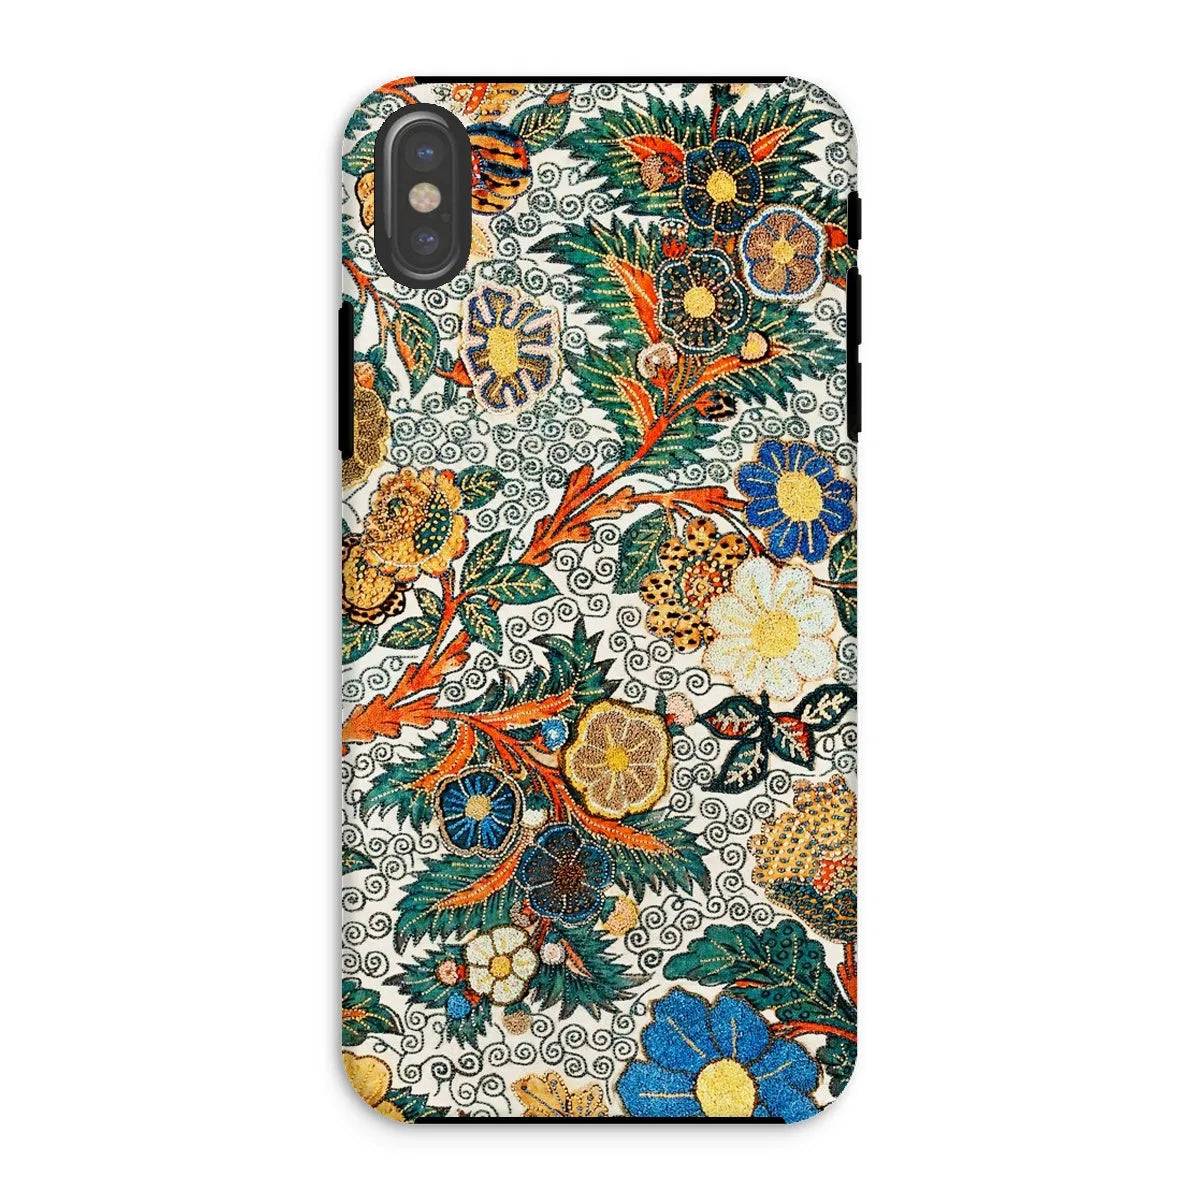 Blossomewhere Japanese Tapestry Art Phone Case - Iphone Xs / Matte - Mobile Phone Cases - Aesthetic Art